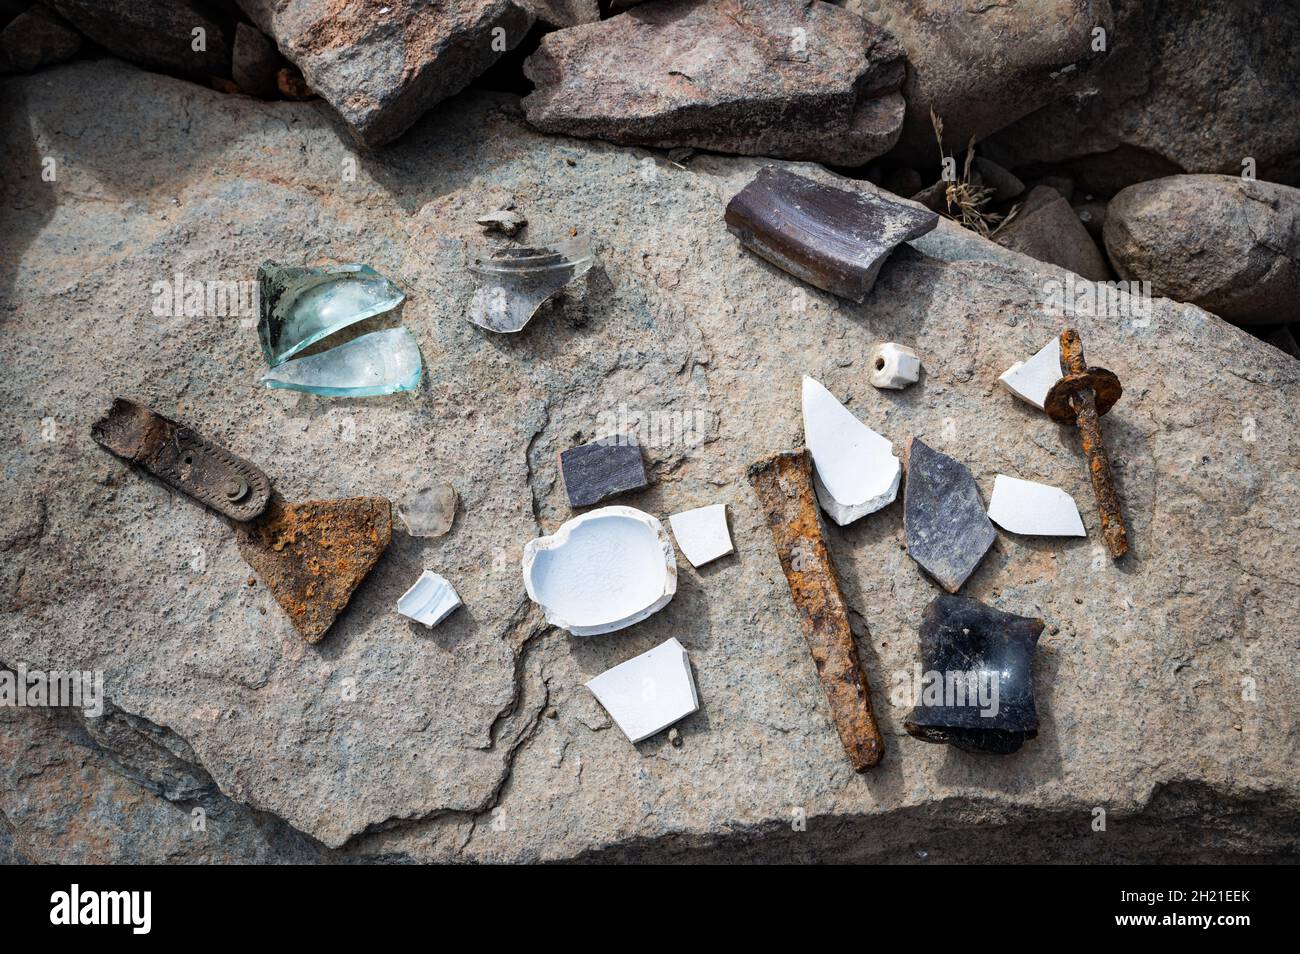 Recovered artifacts in the pioneer town of Red Bank, California. Ruins from the town were uncovered in Folsom Lake due the state's current drought. Stock Photo